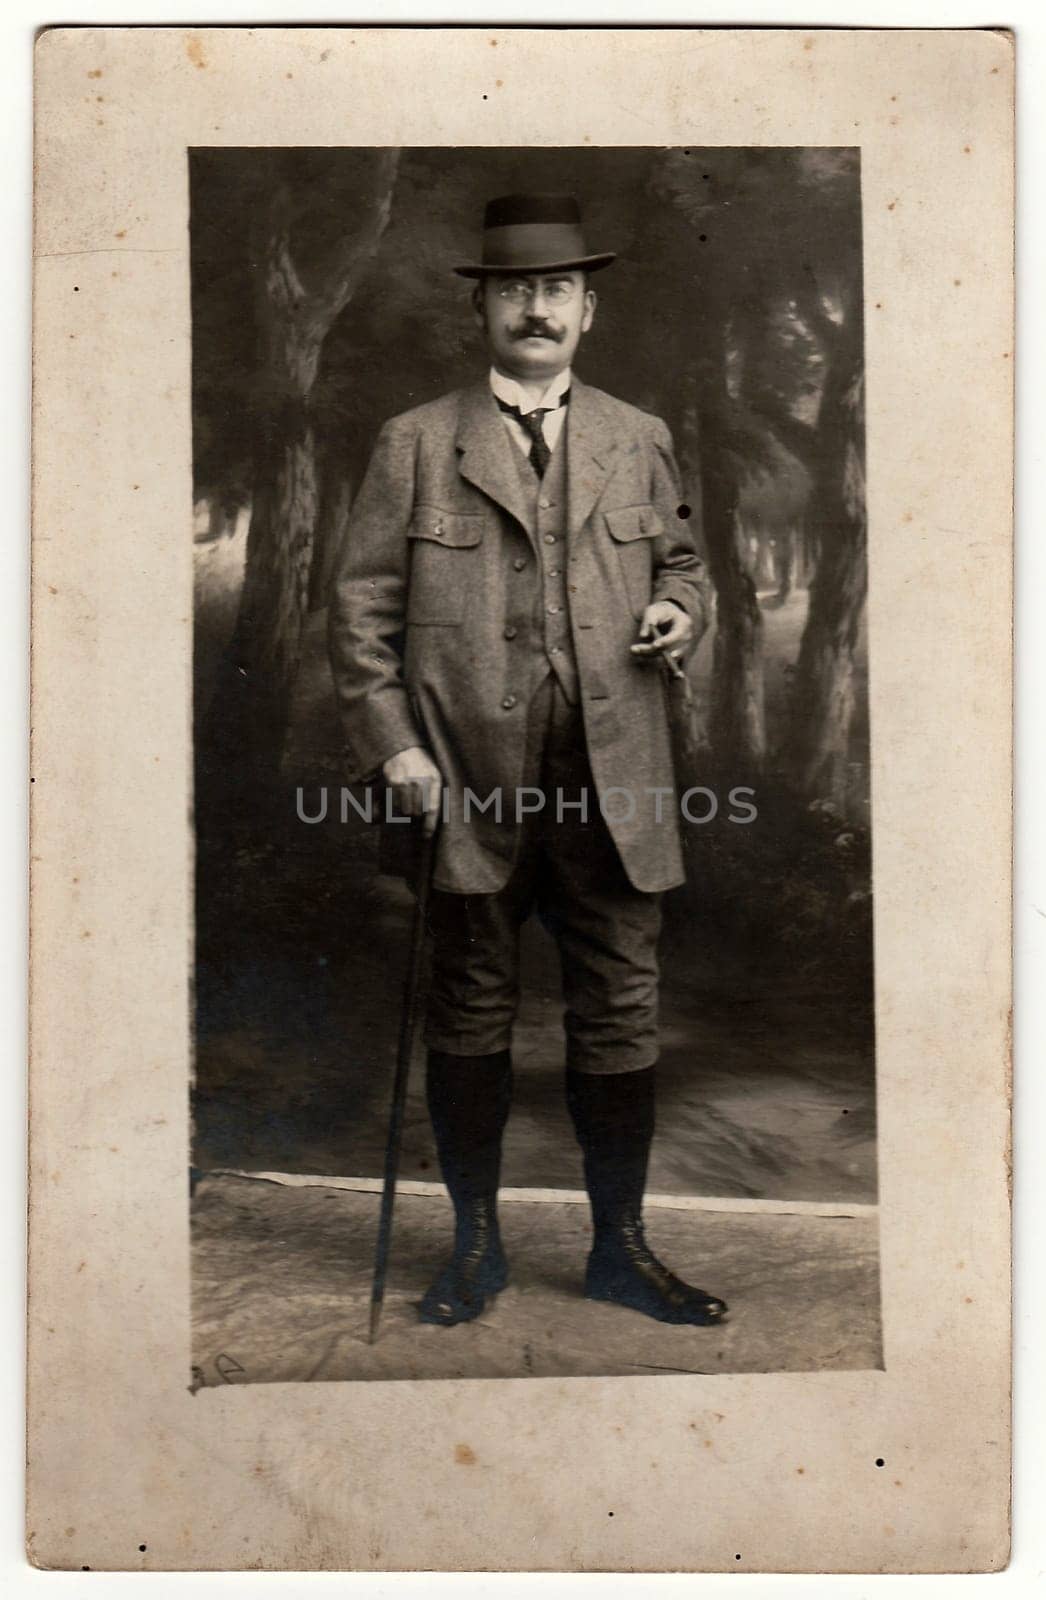 Vintage photo shows man gamekeeper poses with walking stick and cigar in the photography studio. Black white antique photo. by roman_nerud